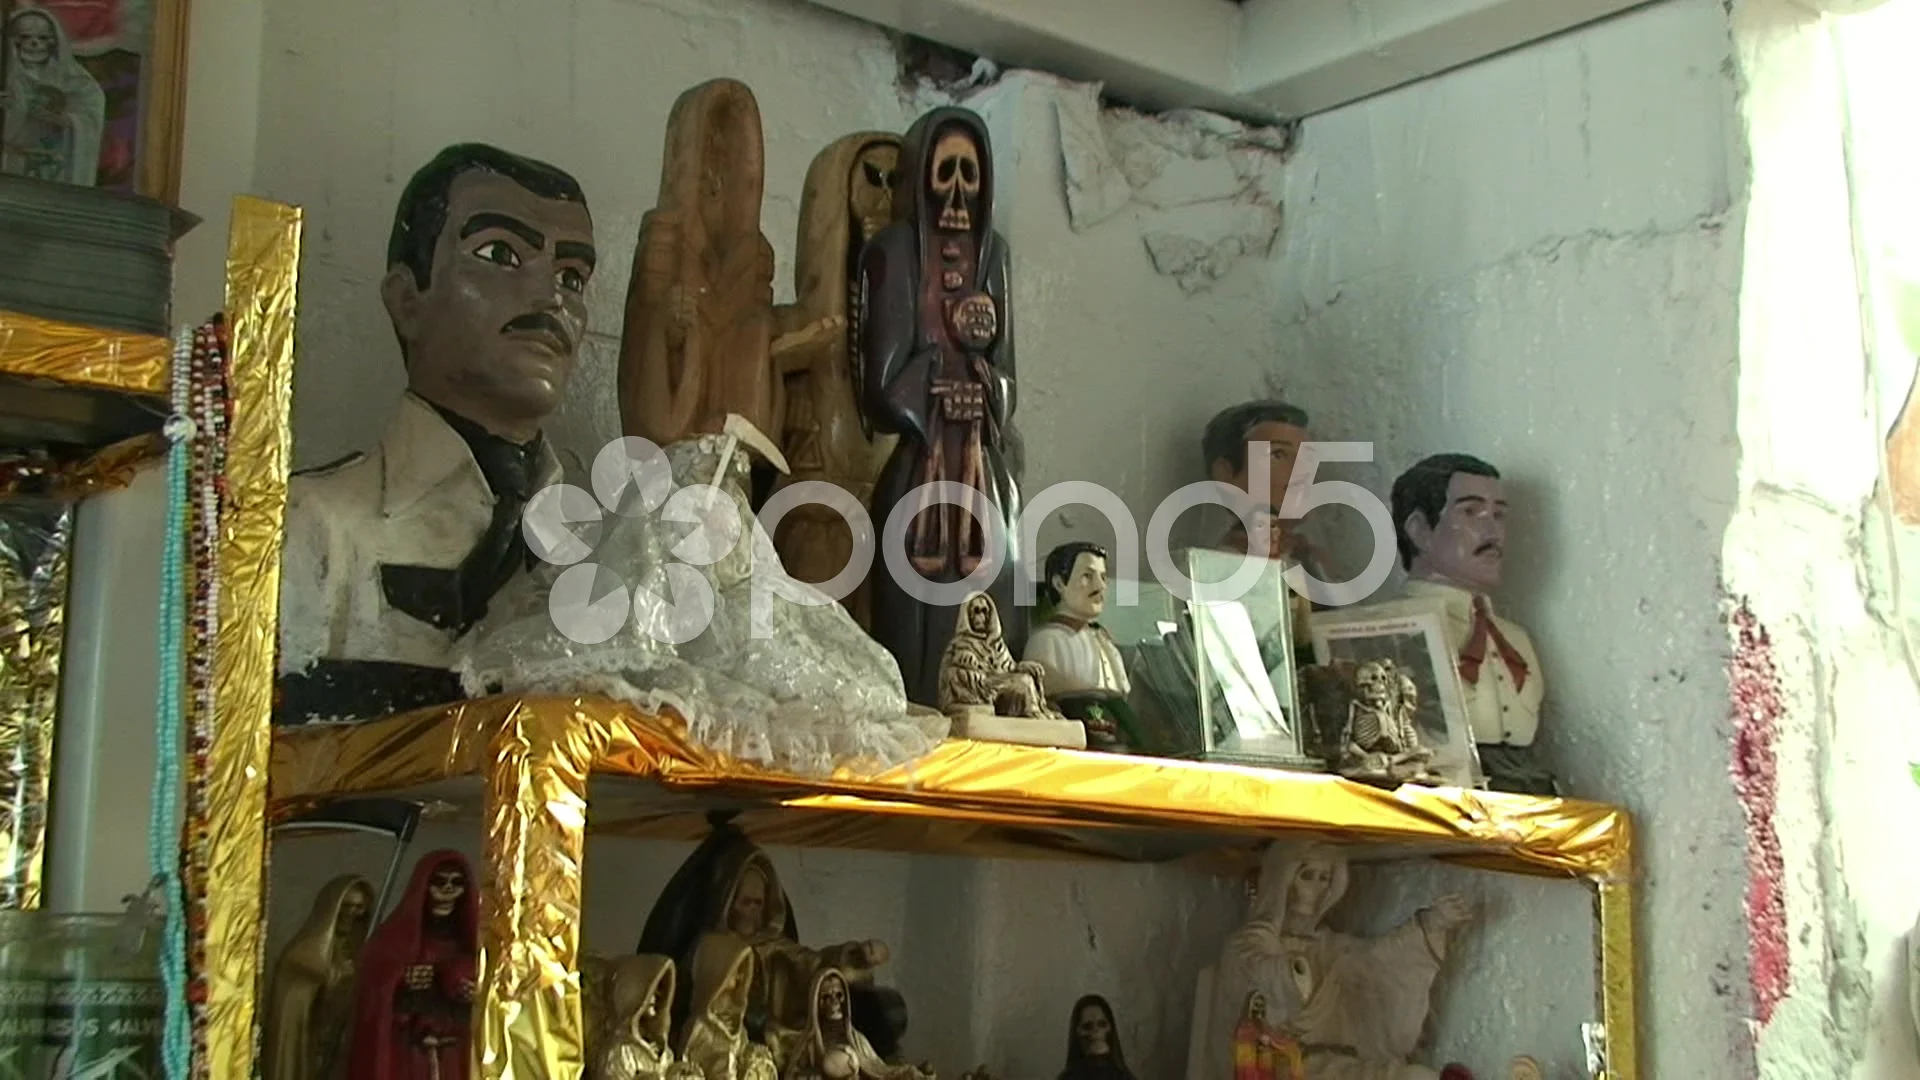 168 Saint Jesus Malverde Stock Photos HighRes Pictures and Images   Getty Images